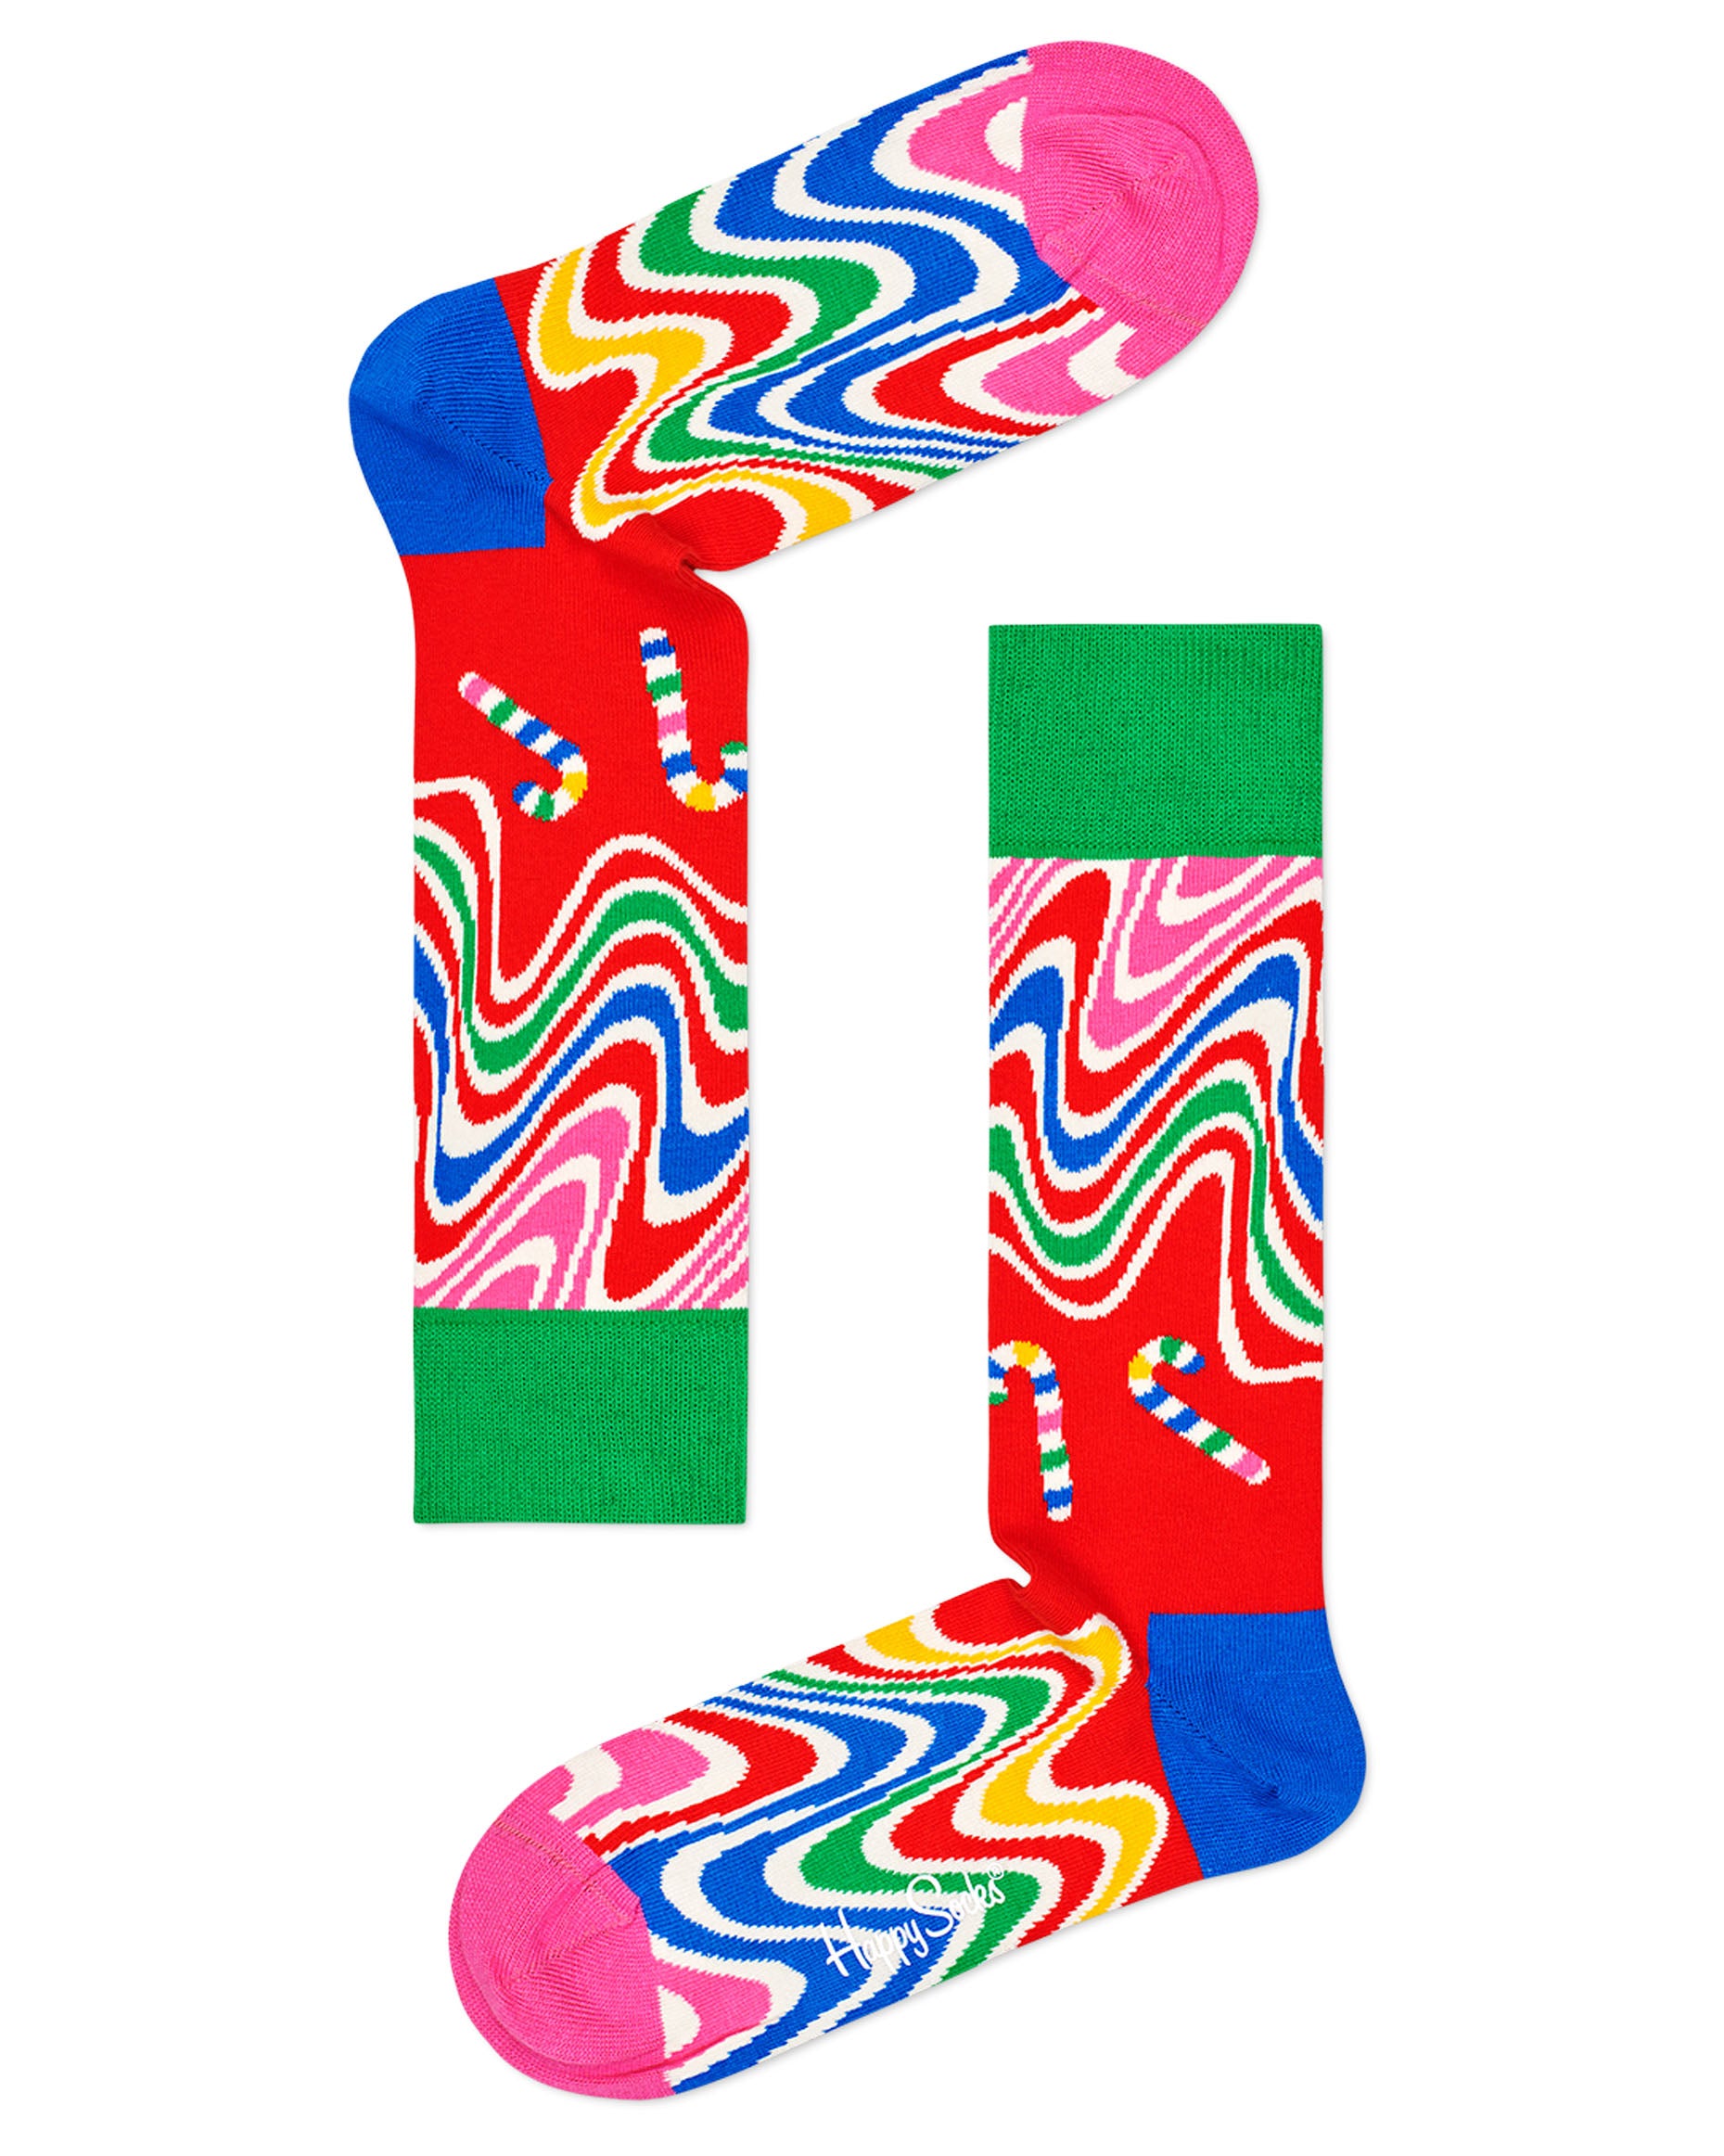 Happy Socks XCCA02-0100 Psychedelic Candy Cane Socks Gift Box - Red cotton socks with multicoloured wavy lines pattern and candy canes